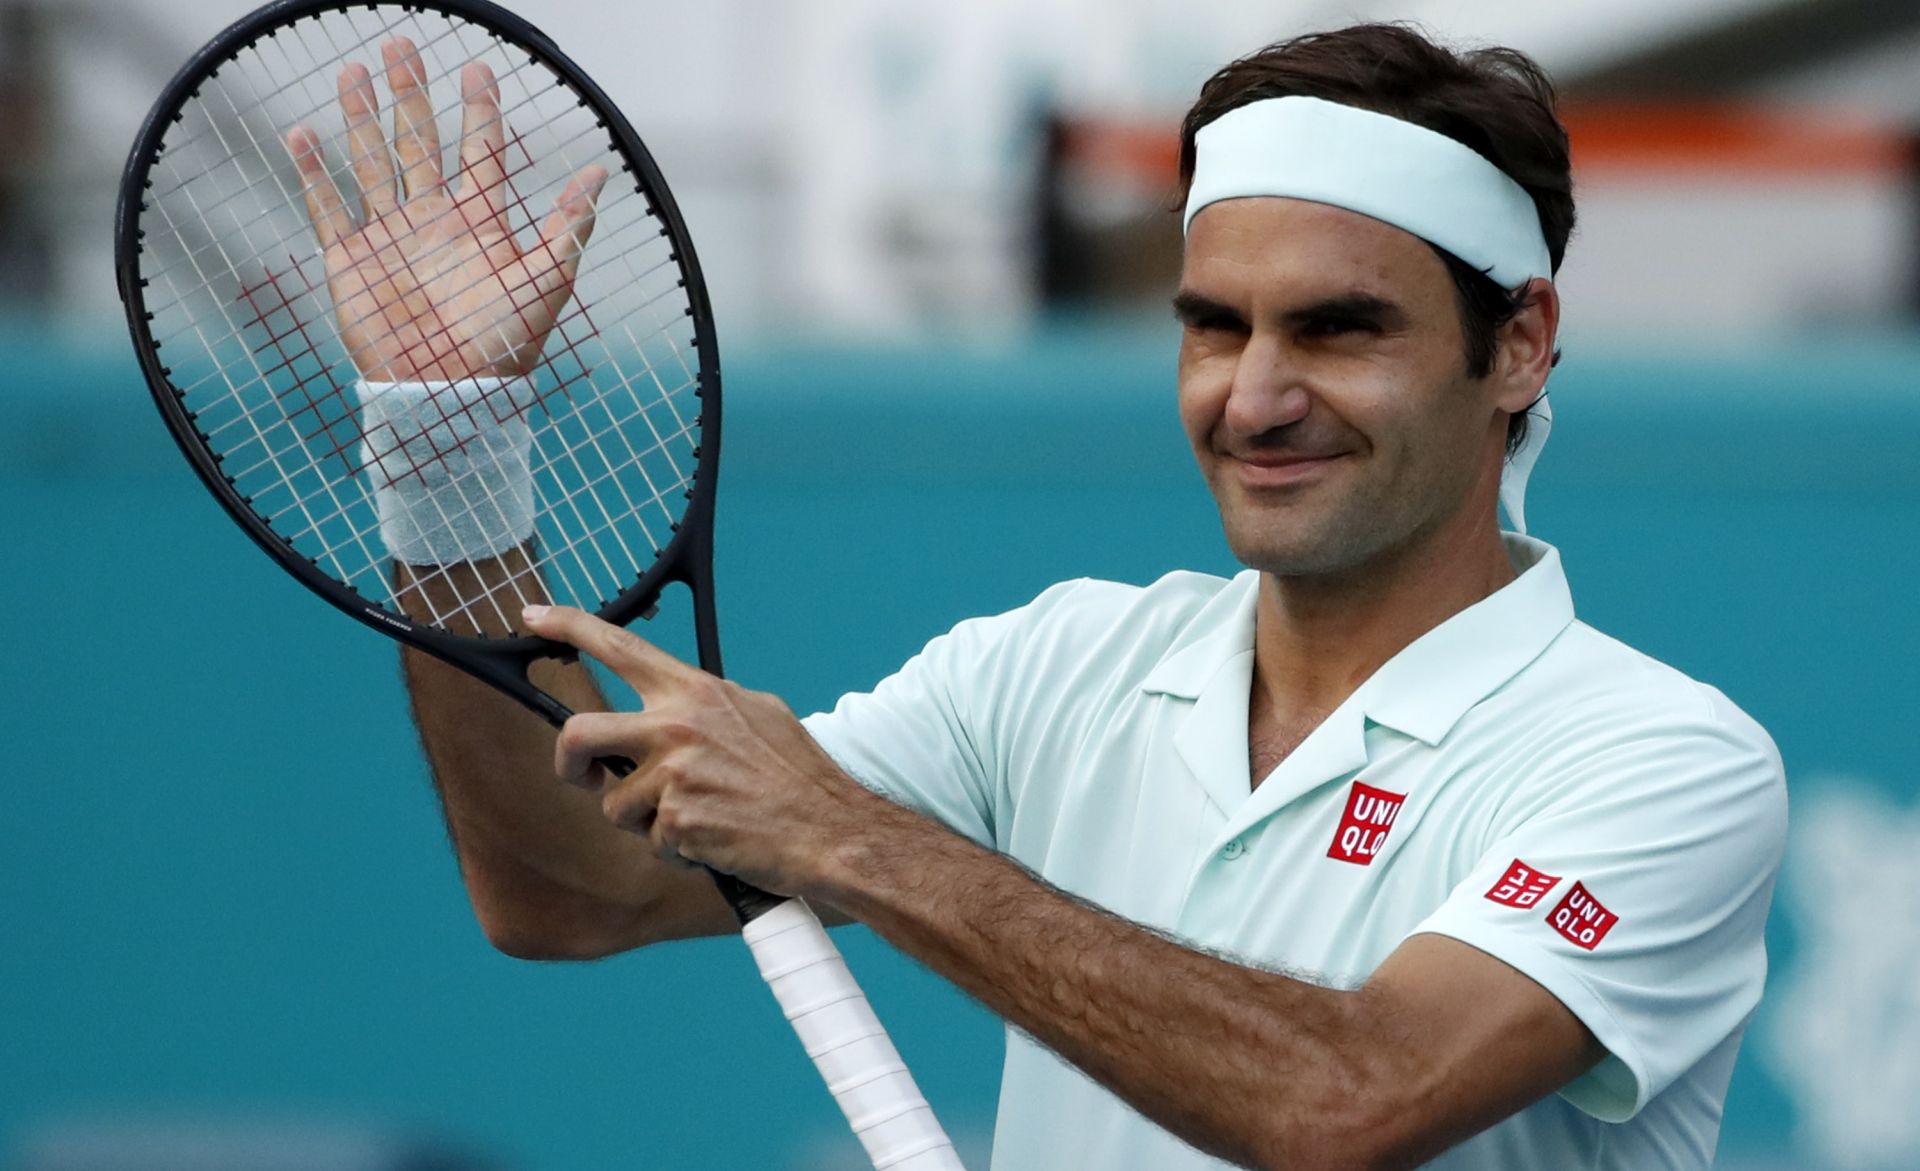 epa07467630 Roger Federer of Switzerland reacts after defeating Daniil Medvedev of Russia during their men's singles match at the Miami Open tennis tournament in Miami, Florida, USA, 27 March 2019.  EPA/JASON SZENES